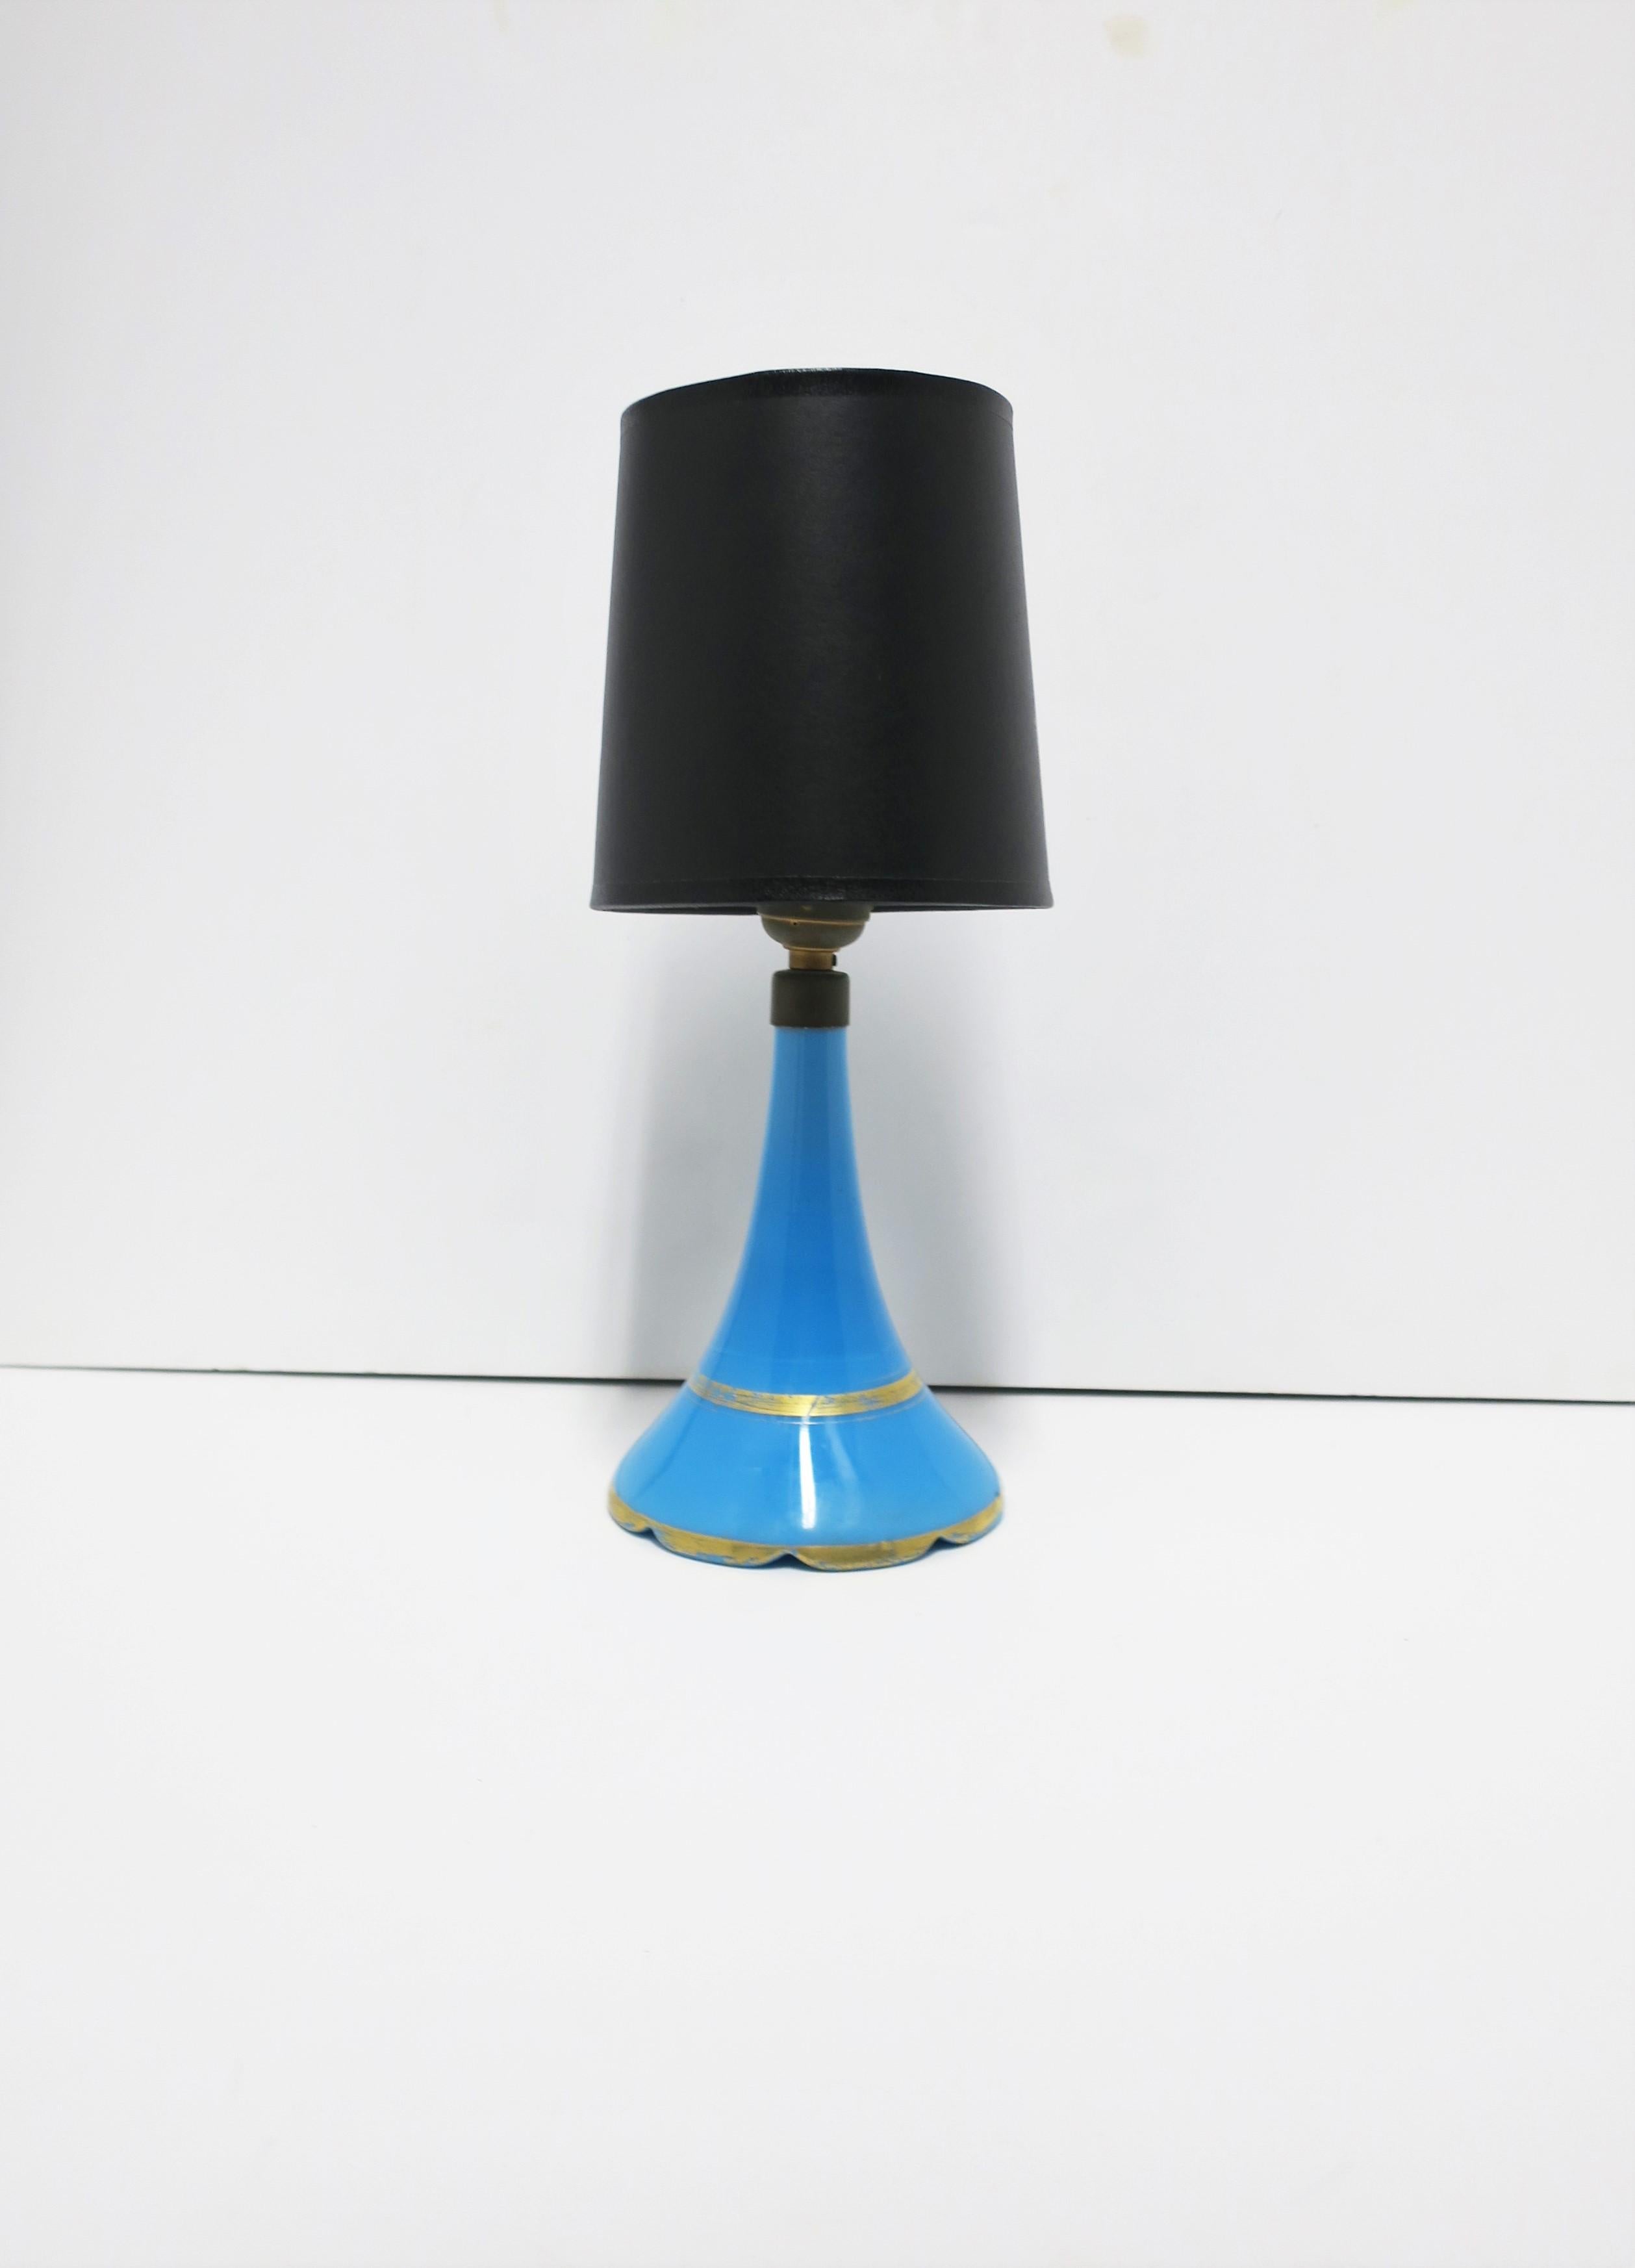 A beautiful Italian blue opaline glass lamp, circa early to mid-20th century, Italy. Lamp is an azure sky-blue with gold detail and scalloped edged base. Lamp includes off-white silk shade. In fine working order as shown in image #8. A great desk or